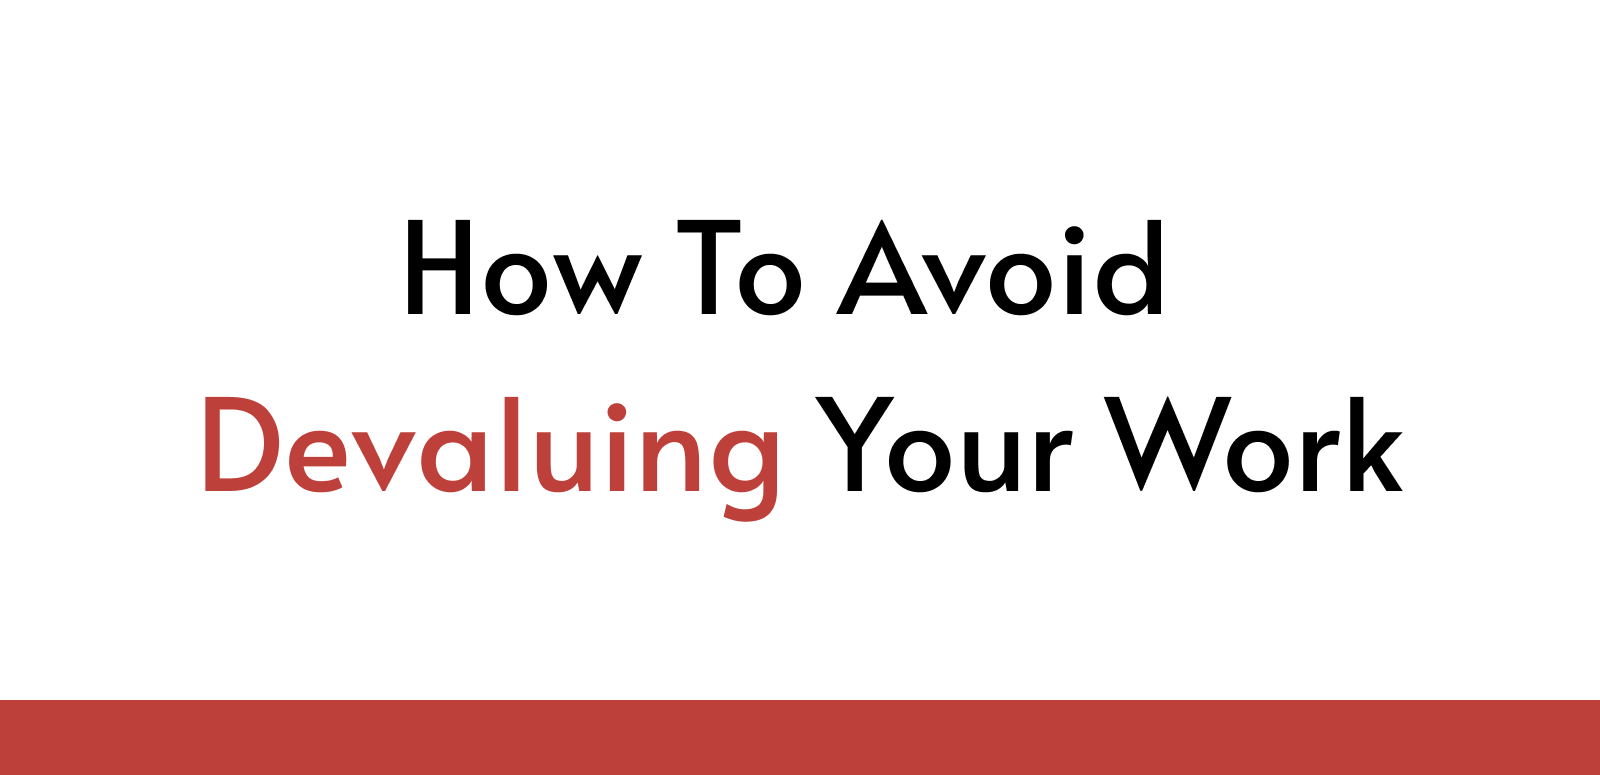 How To Avoid Devaluing Your Work